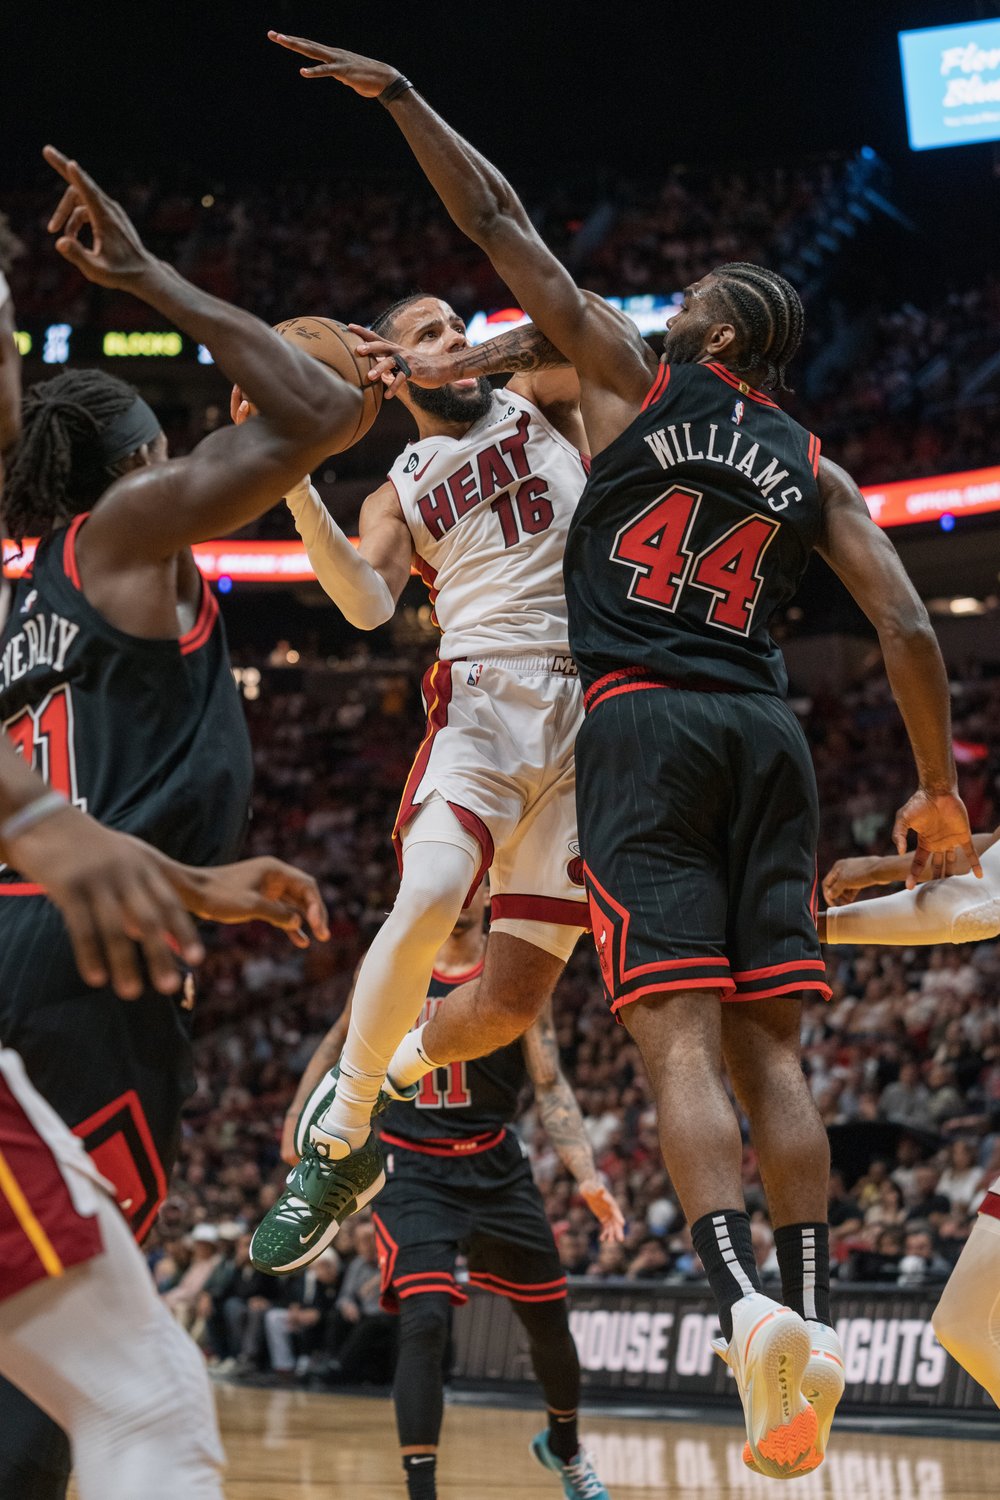  MIAMI, FL - APRIL 14: Caleb Martin #16 of the Miami Heat attempts to shoot the ball while being defended by Patrick Beverley #21 of the Chicago Bulls (L) and Patrick Williams #44 of the Chicago Bulls at Kaseya Center on April 14, 2023 in Miami, Flor